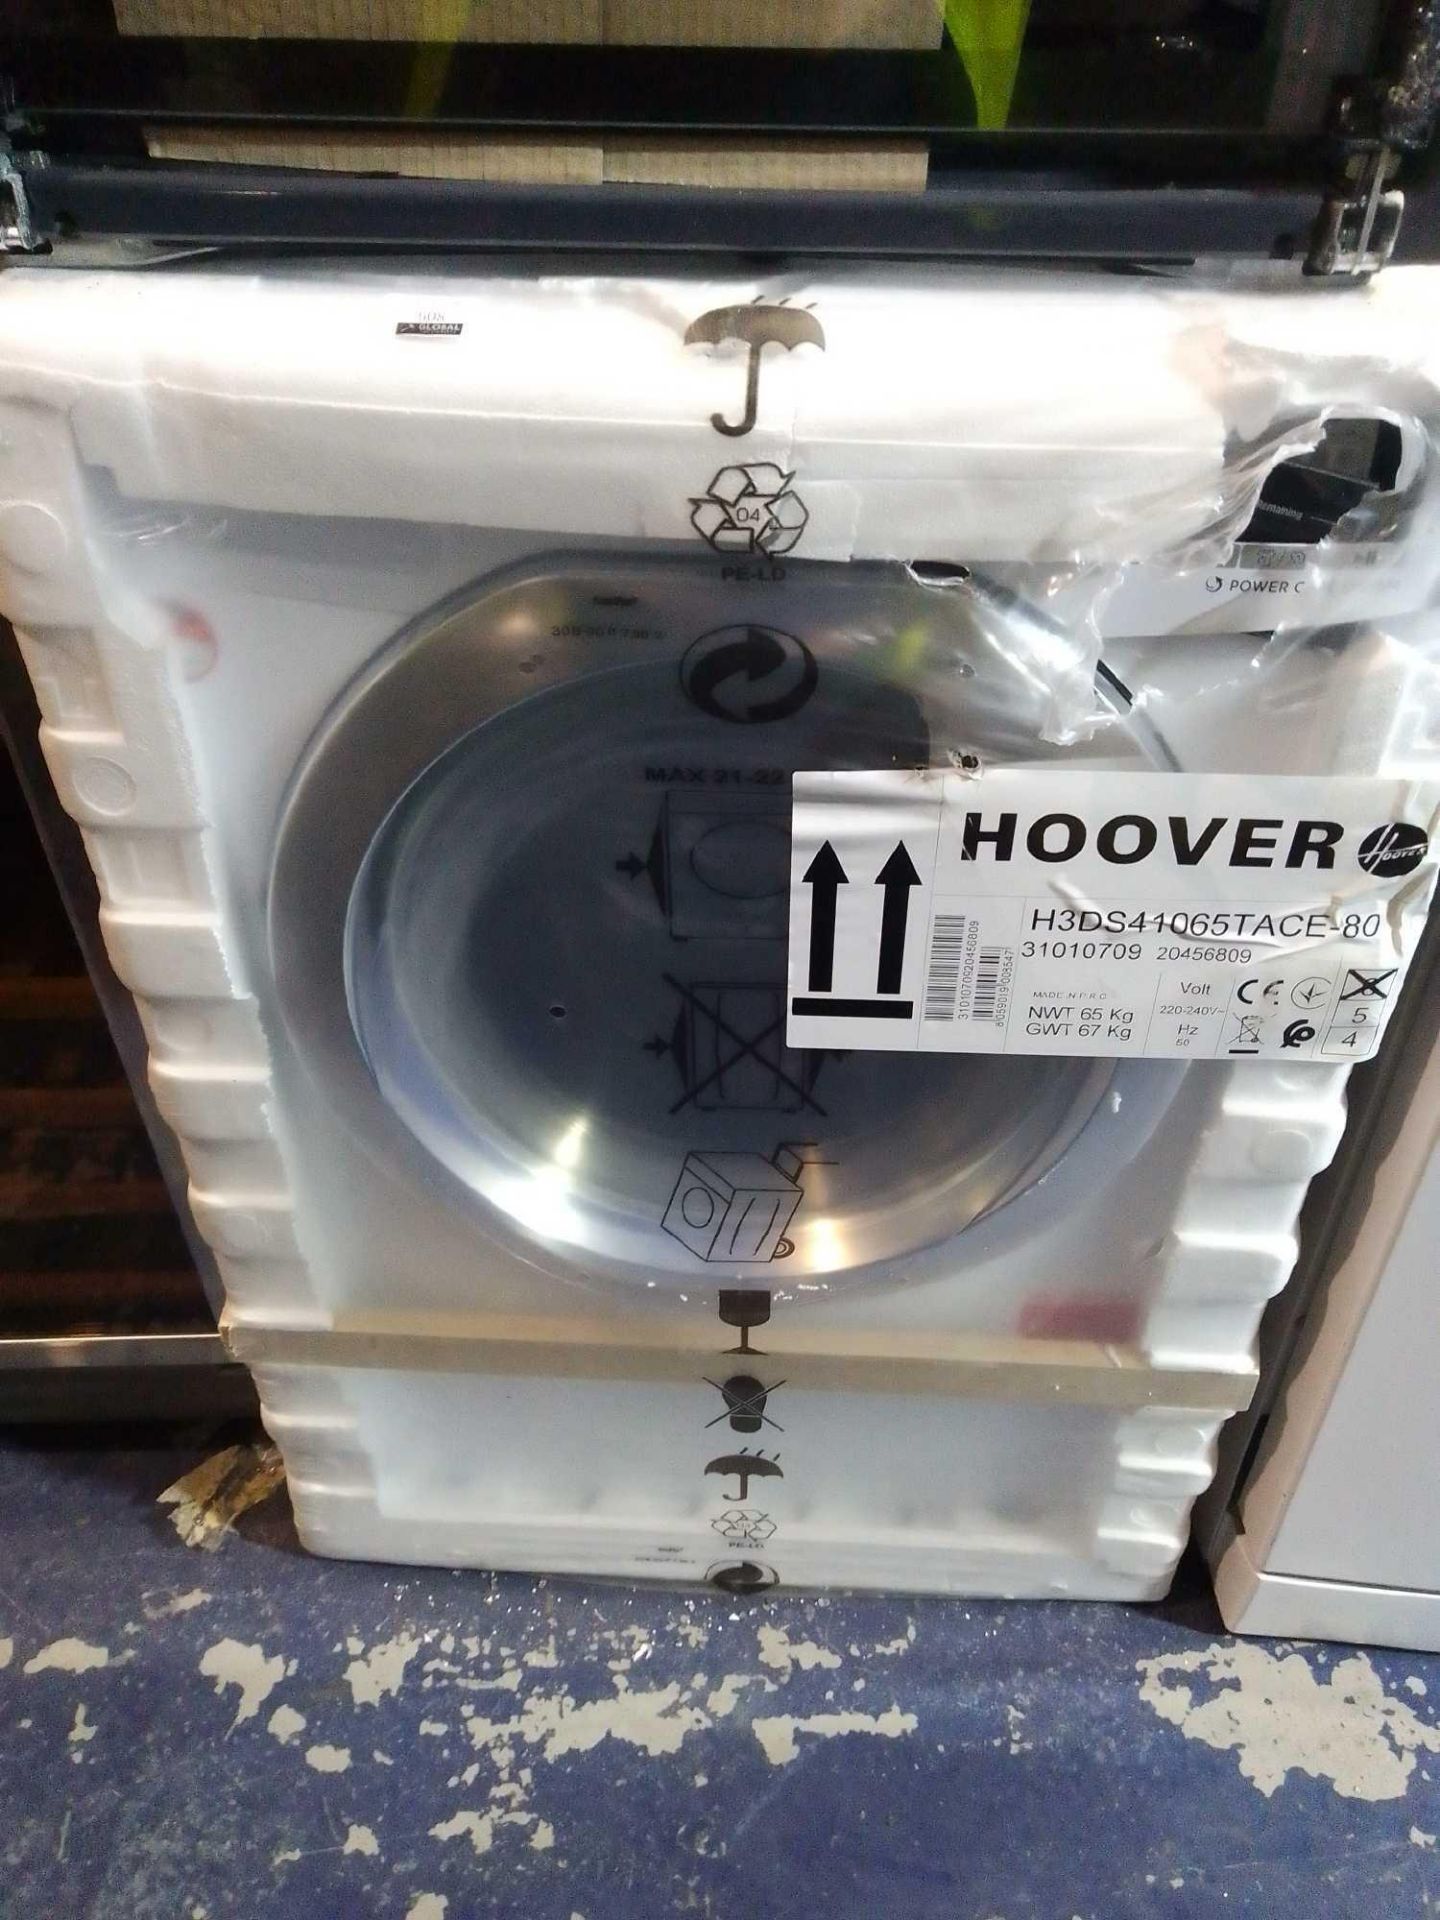 RRP £450 Boxed Hoover Hwash 300 H3Ds 41065Tace-80 Free Standing 10+6Kg Digital Display Washer